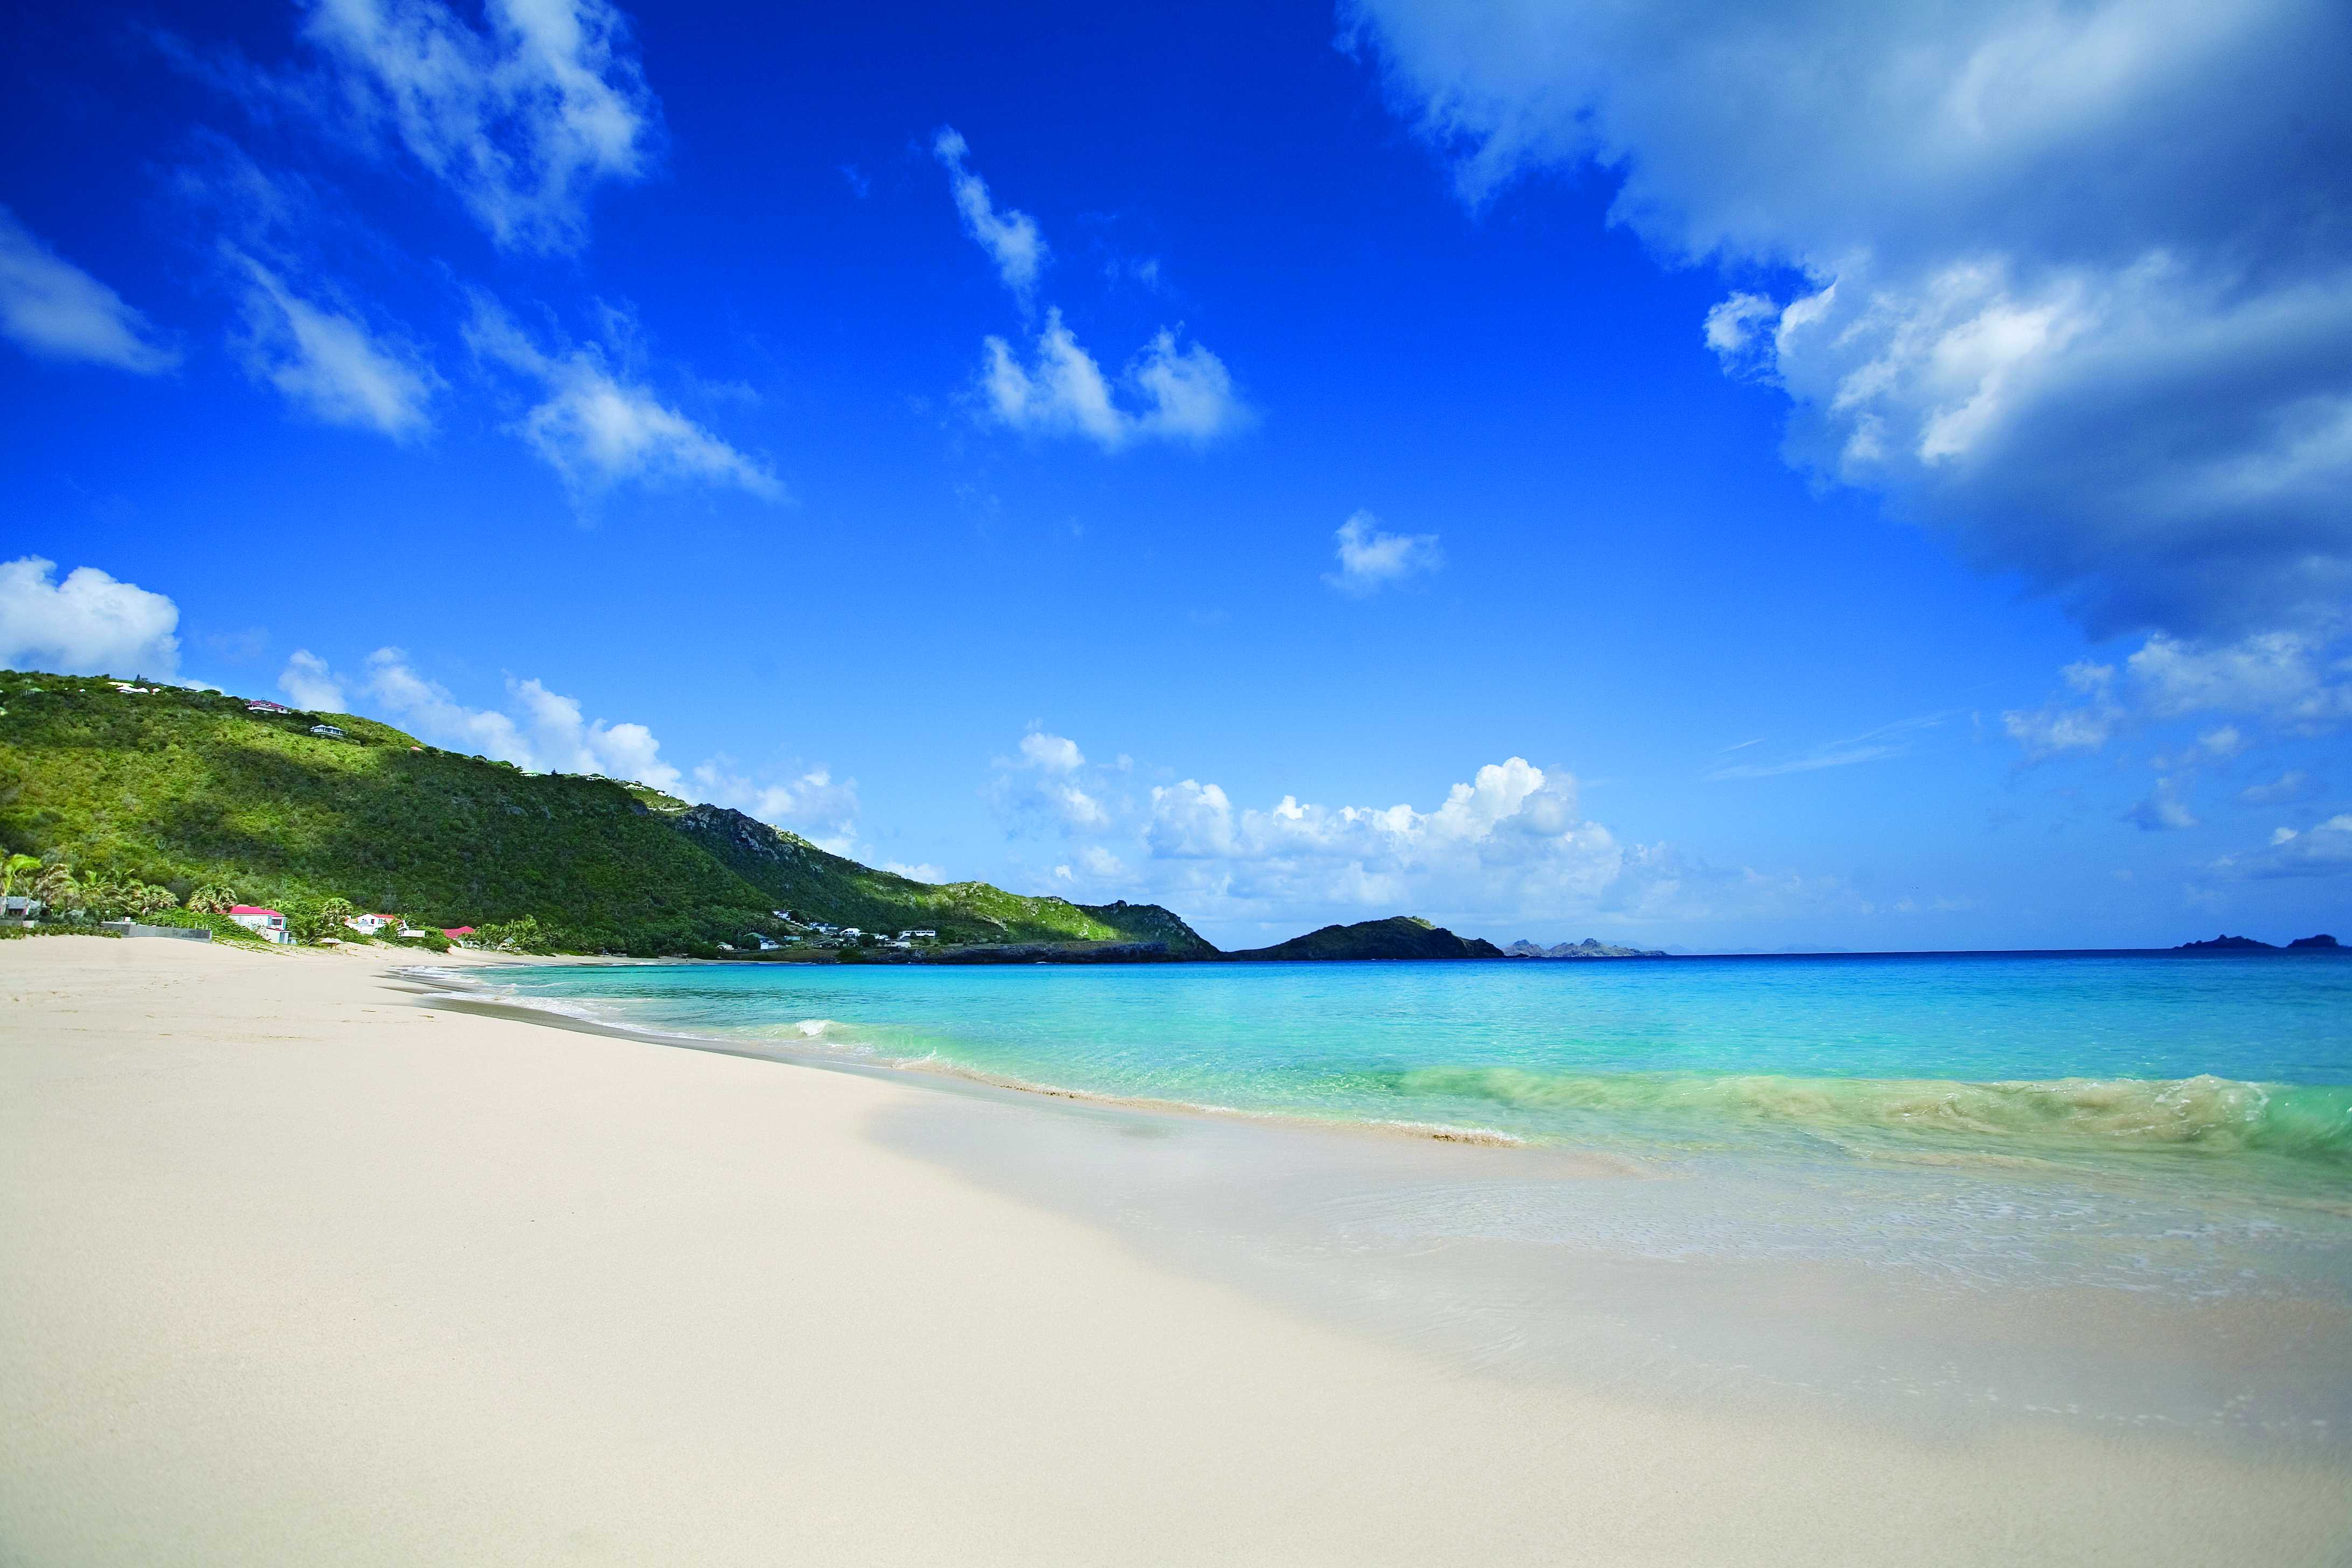 Information on the Best Beaches of St. Barths